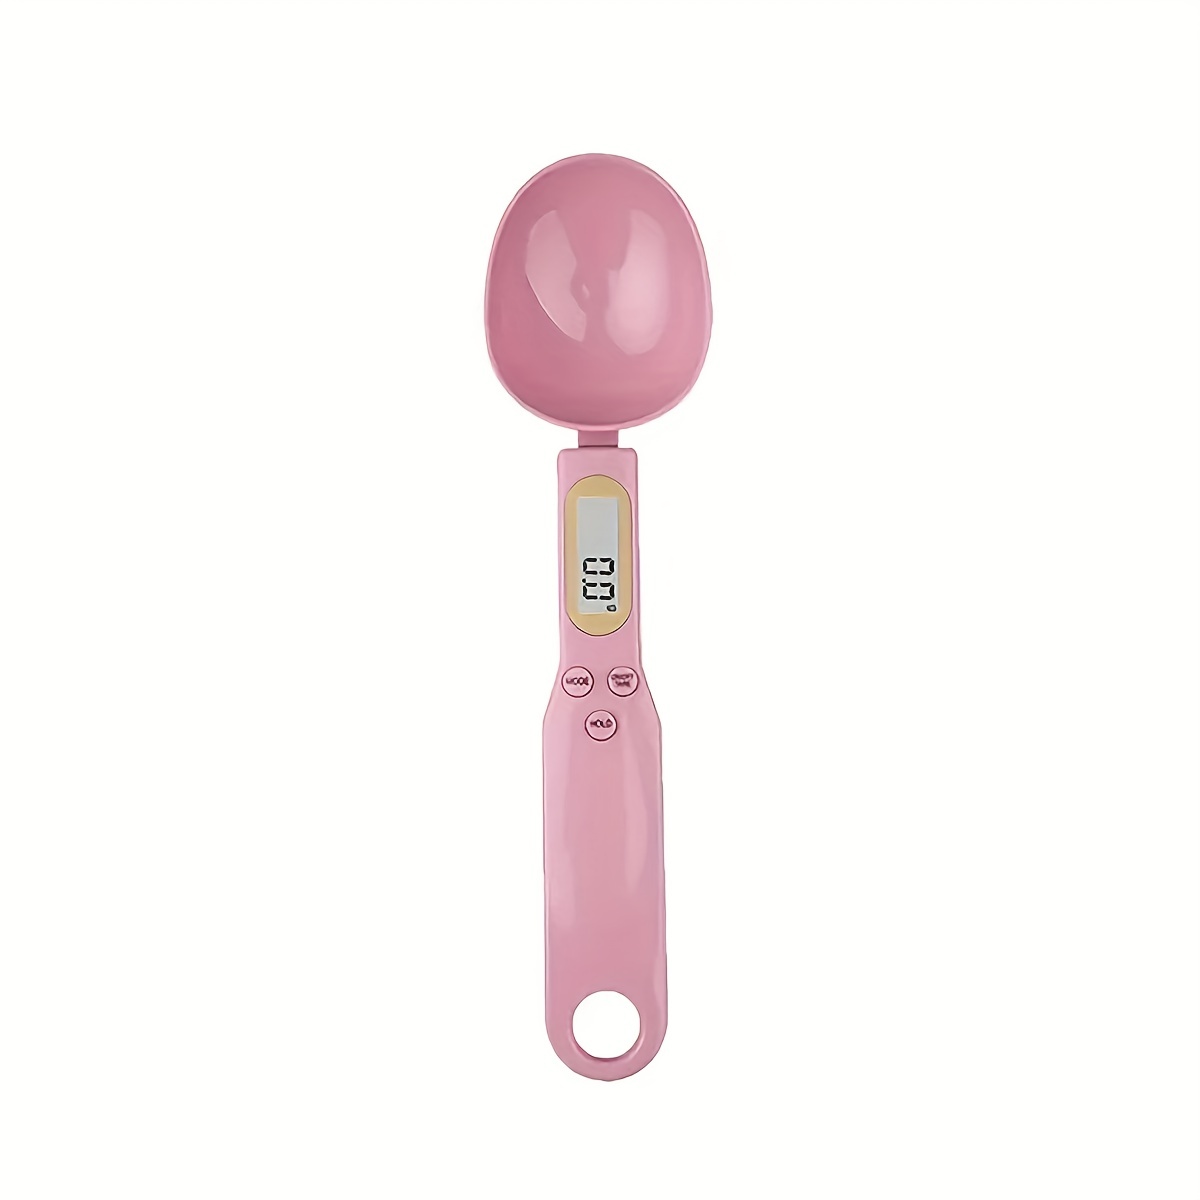 Digital Measuring Spoon, Electronic Weighted Spoon,Digital Kitchen